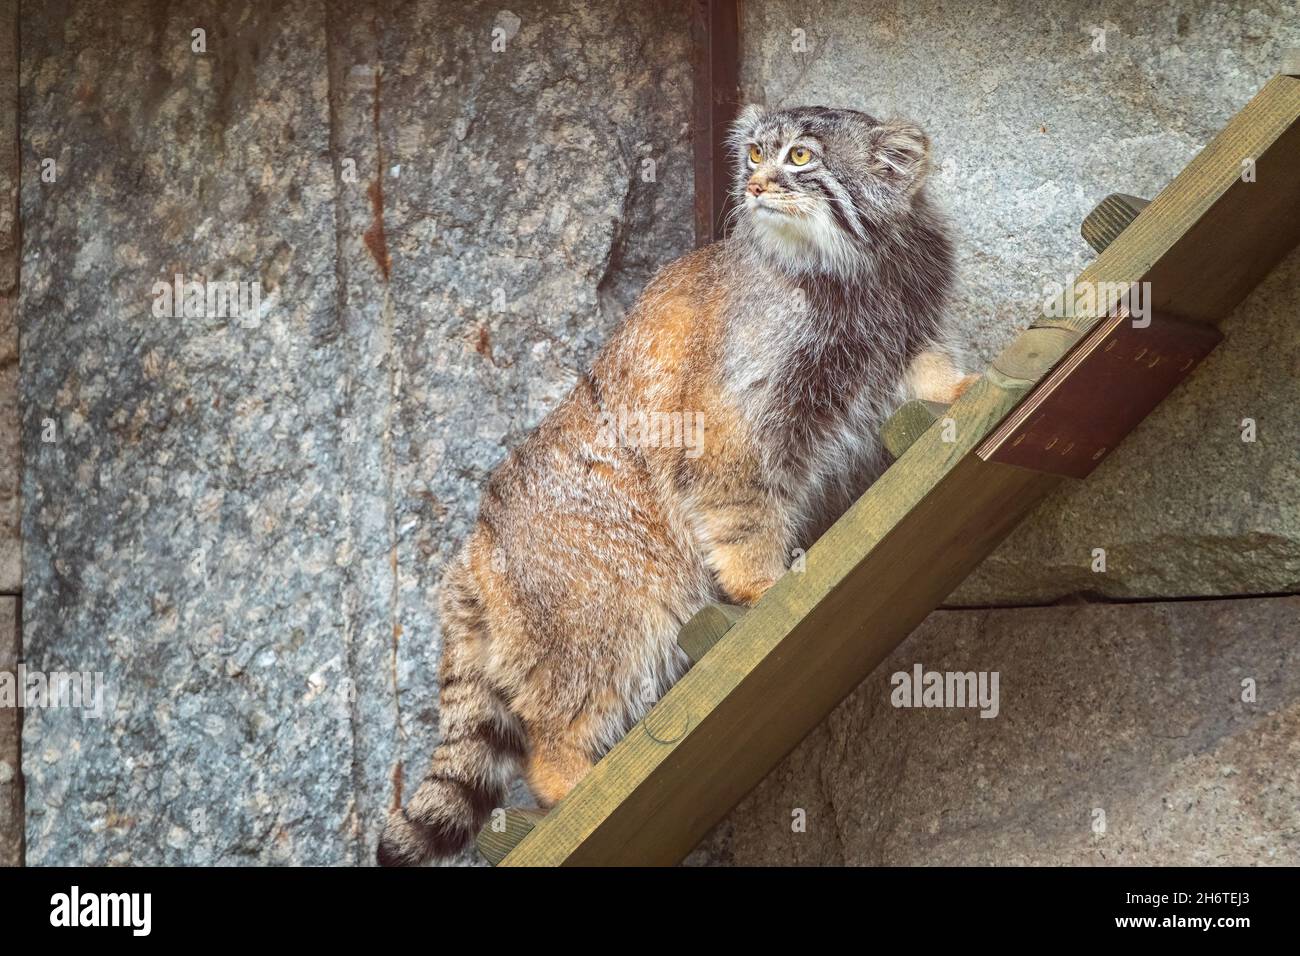 Wild cat manul or Pallas's cat, lat. Otocolobus manul, in the zoo, Manul is a small wild cat with long and dense light grey fur. Stock Photo